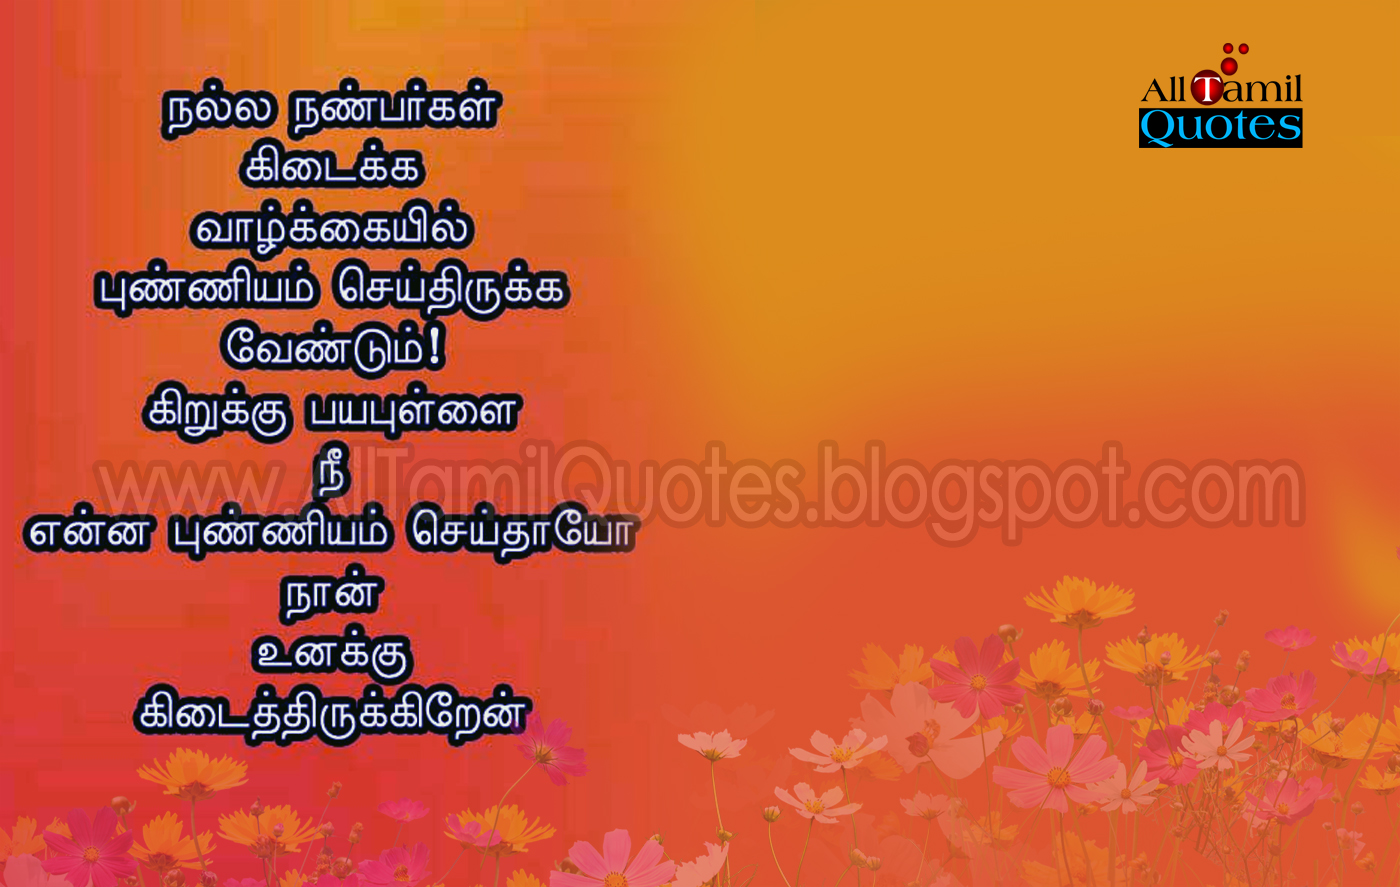 Tamil Quotes and Images about Friendship Thoughts and Feelings